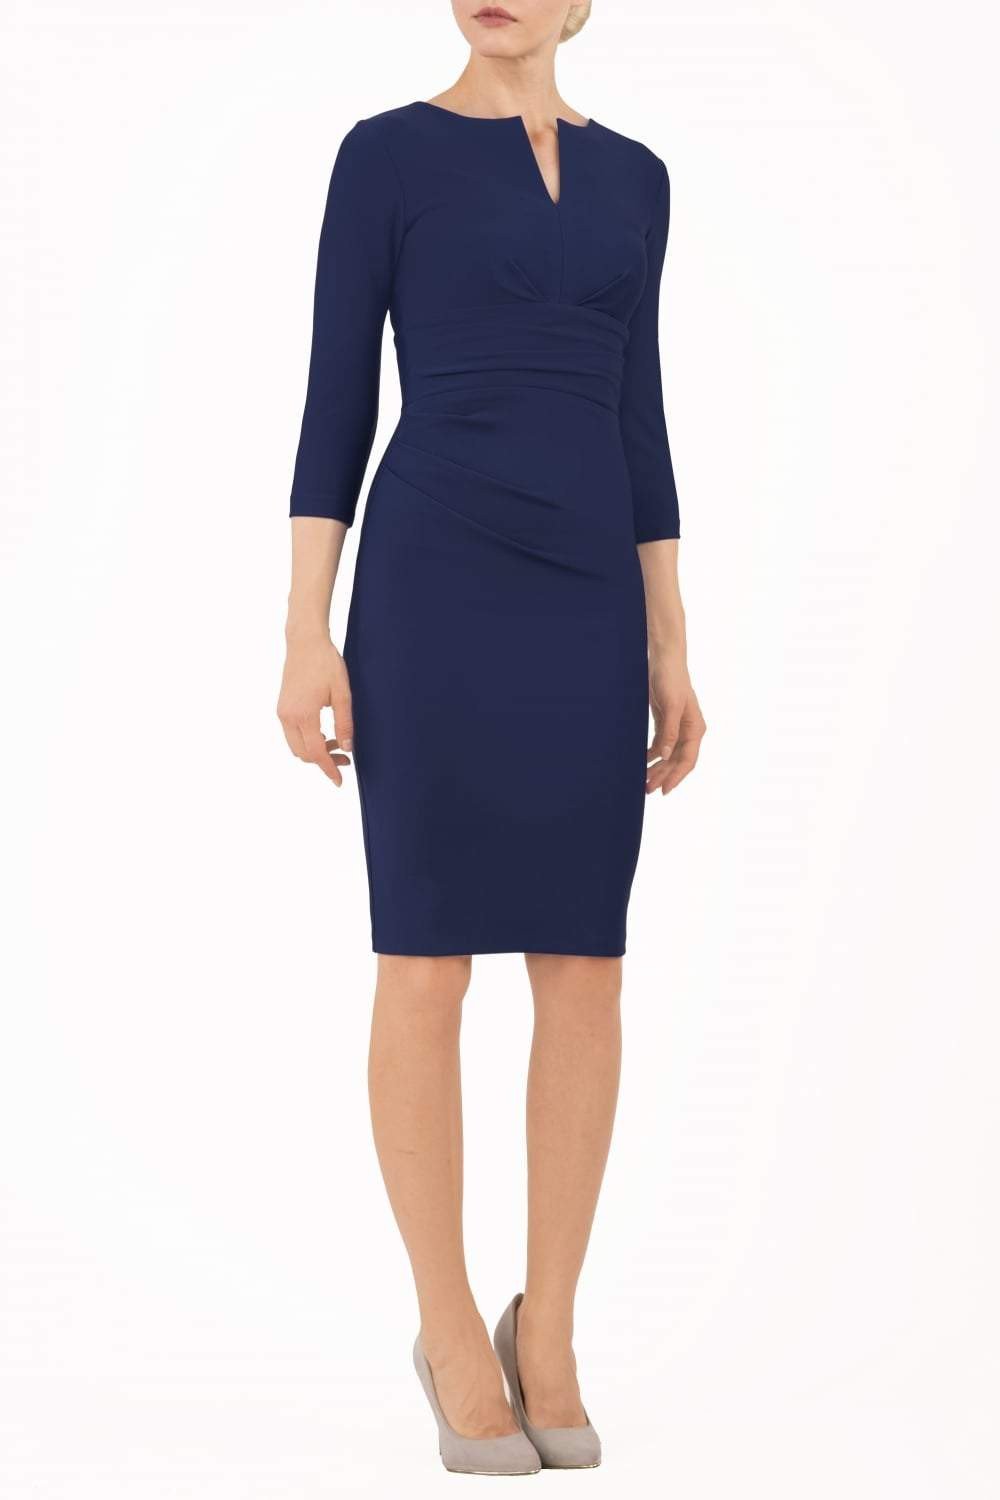 Women' Business Donna 3/4 Sleeve Dress - Navy NORA GARDNER | OFFICIAL STORE for work and office